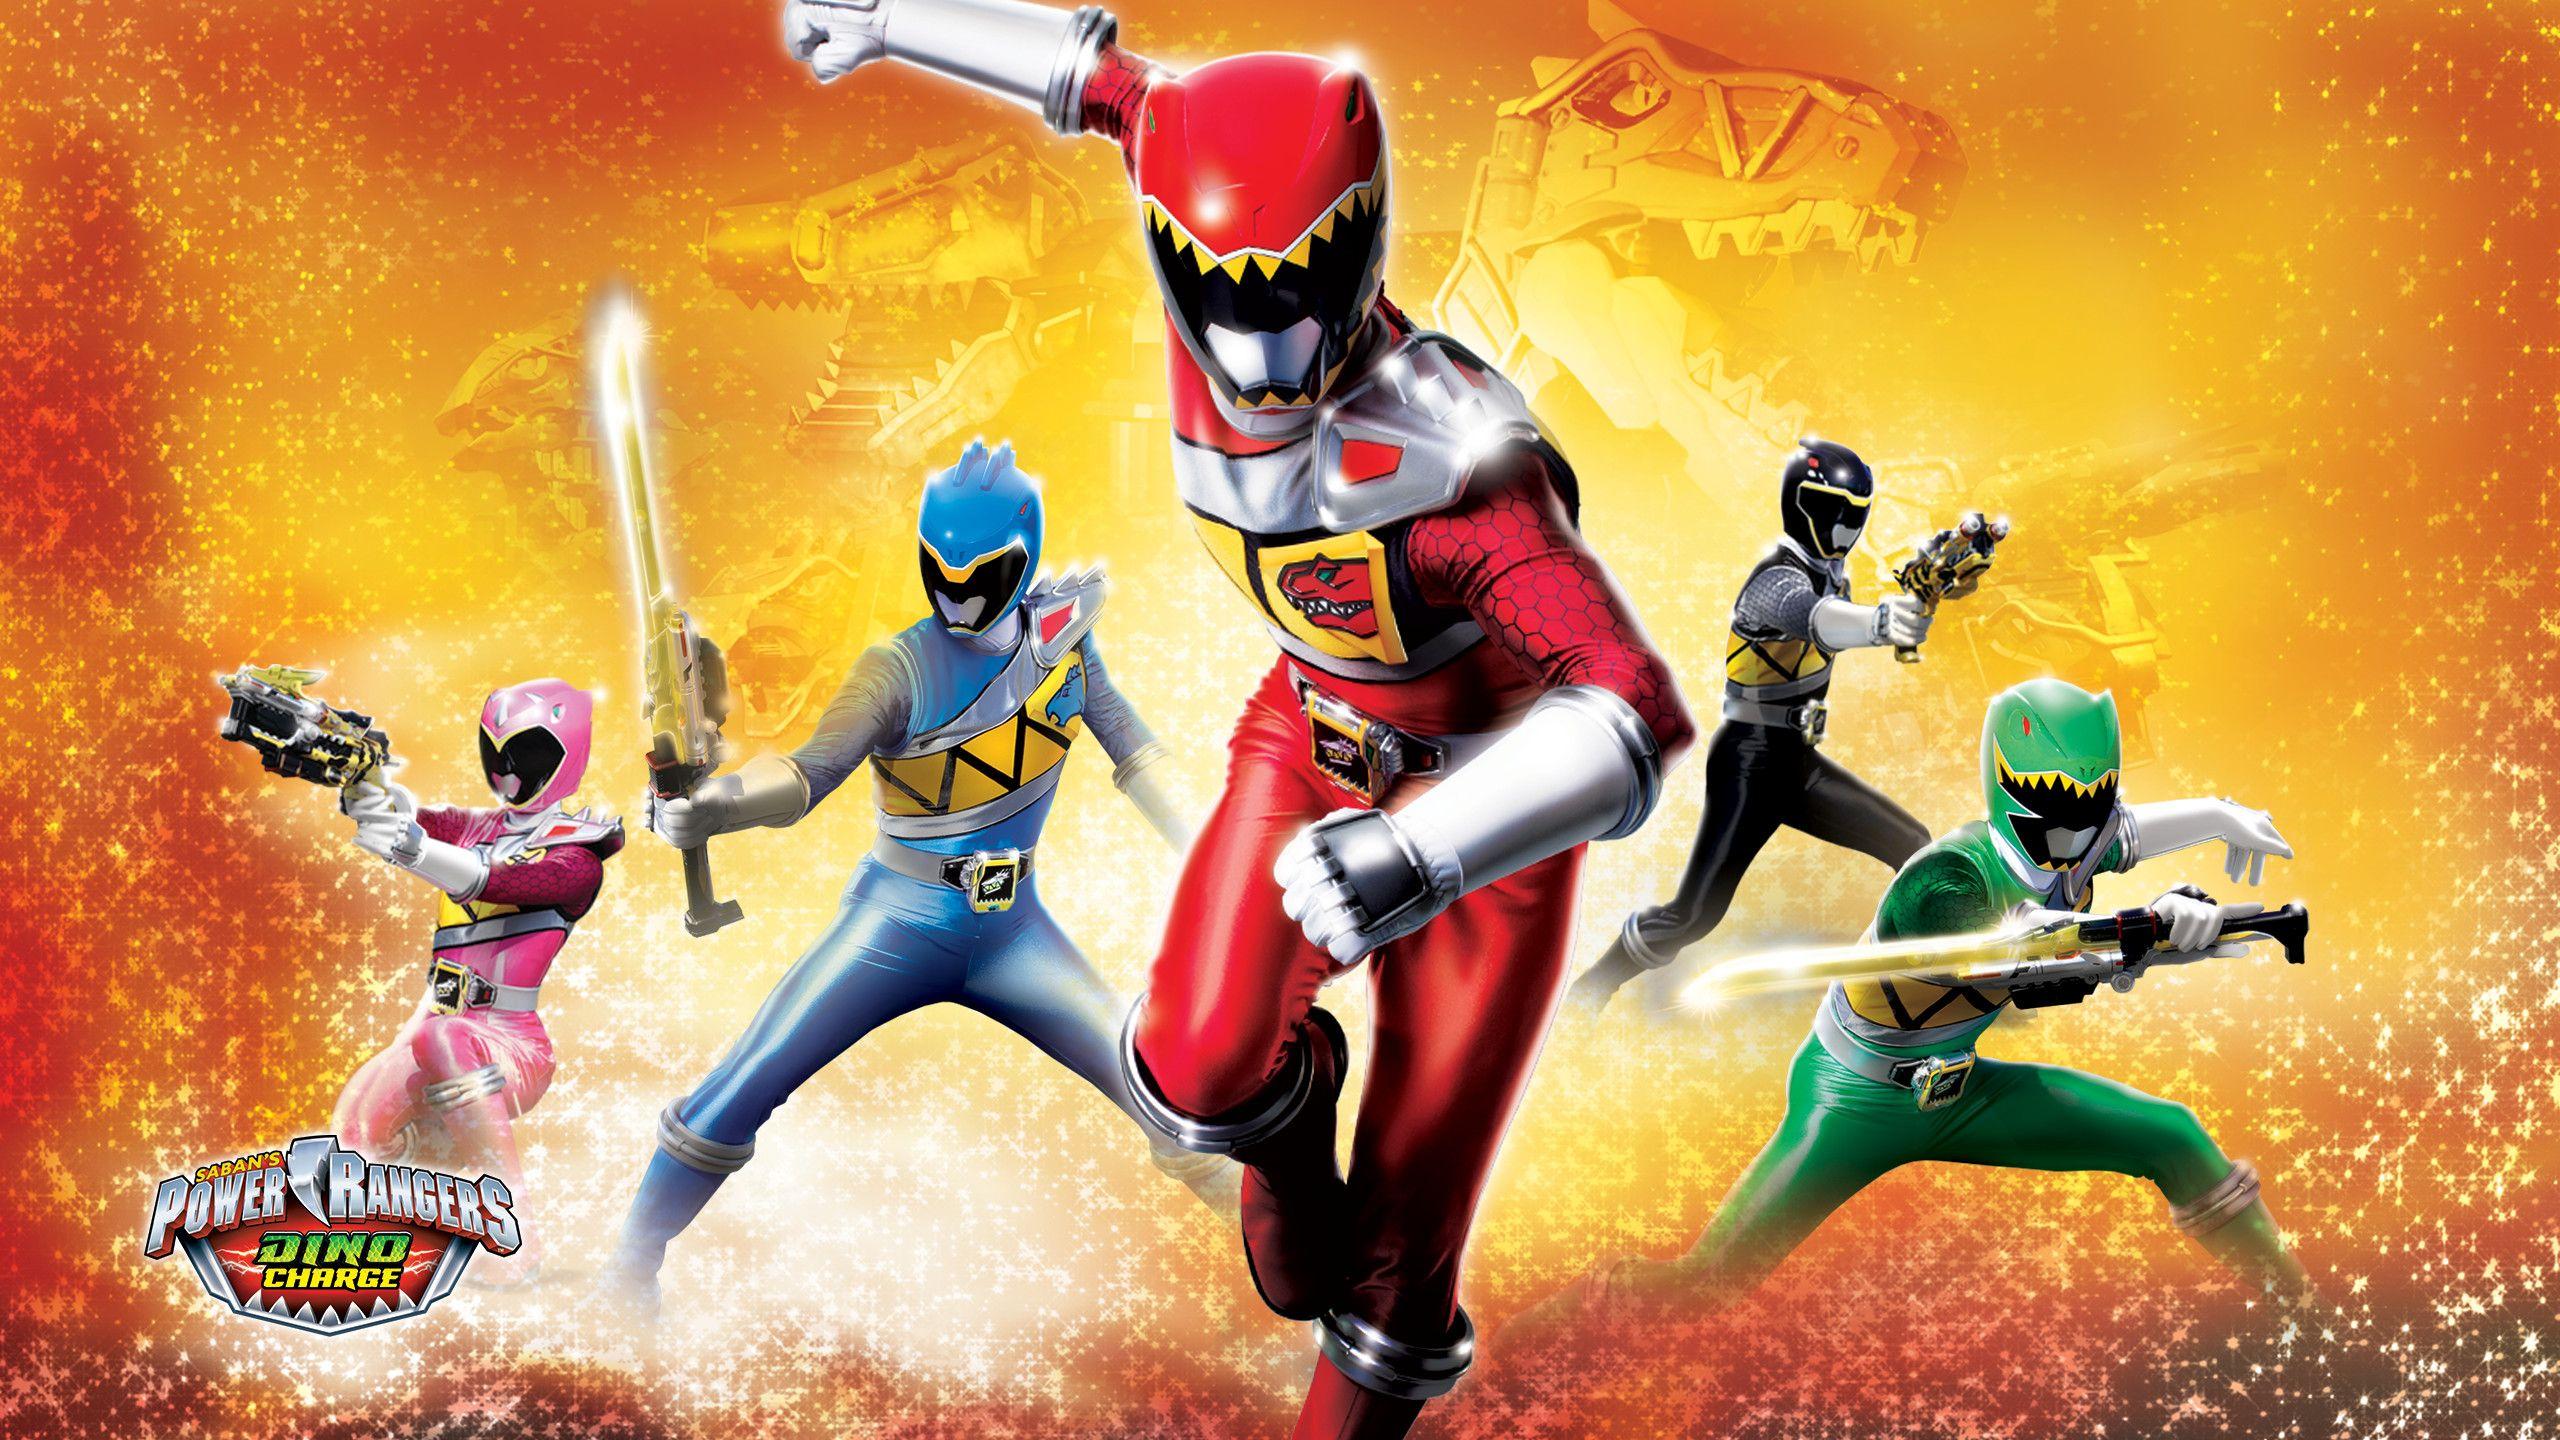 Power Rangers Dino Charge Wallpapers - Top Free Power Rangers Dino ...